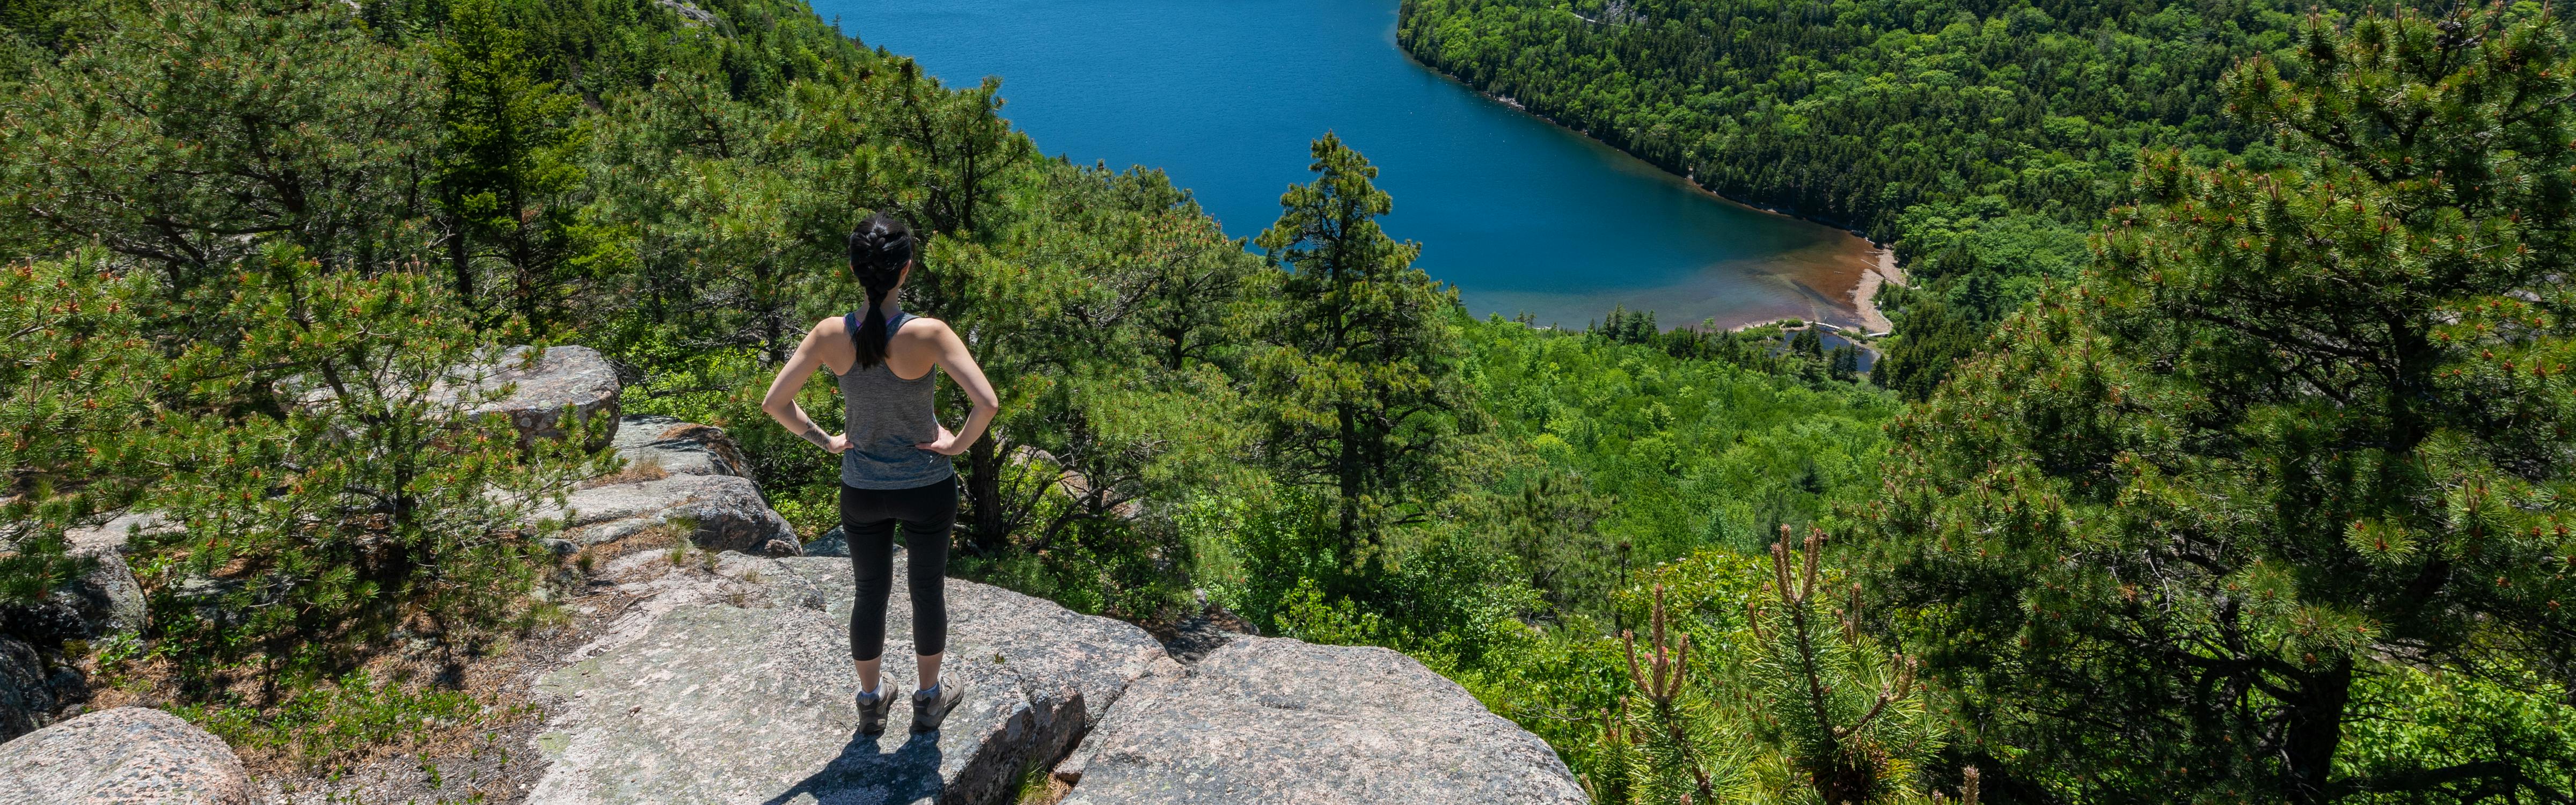 Woman standing on a cliff, looking out at the forest and lake below